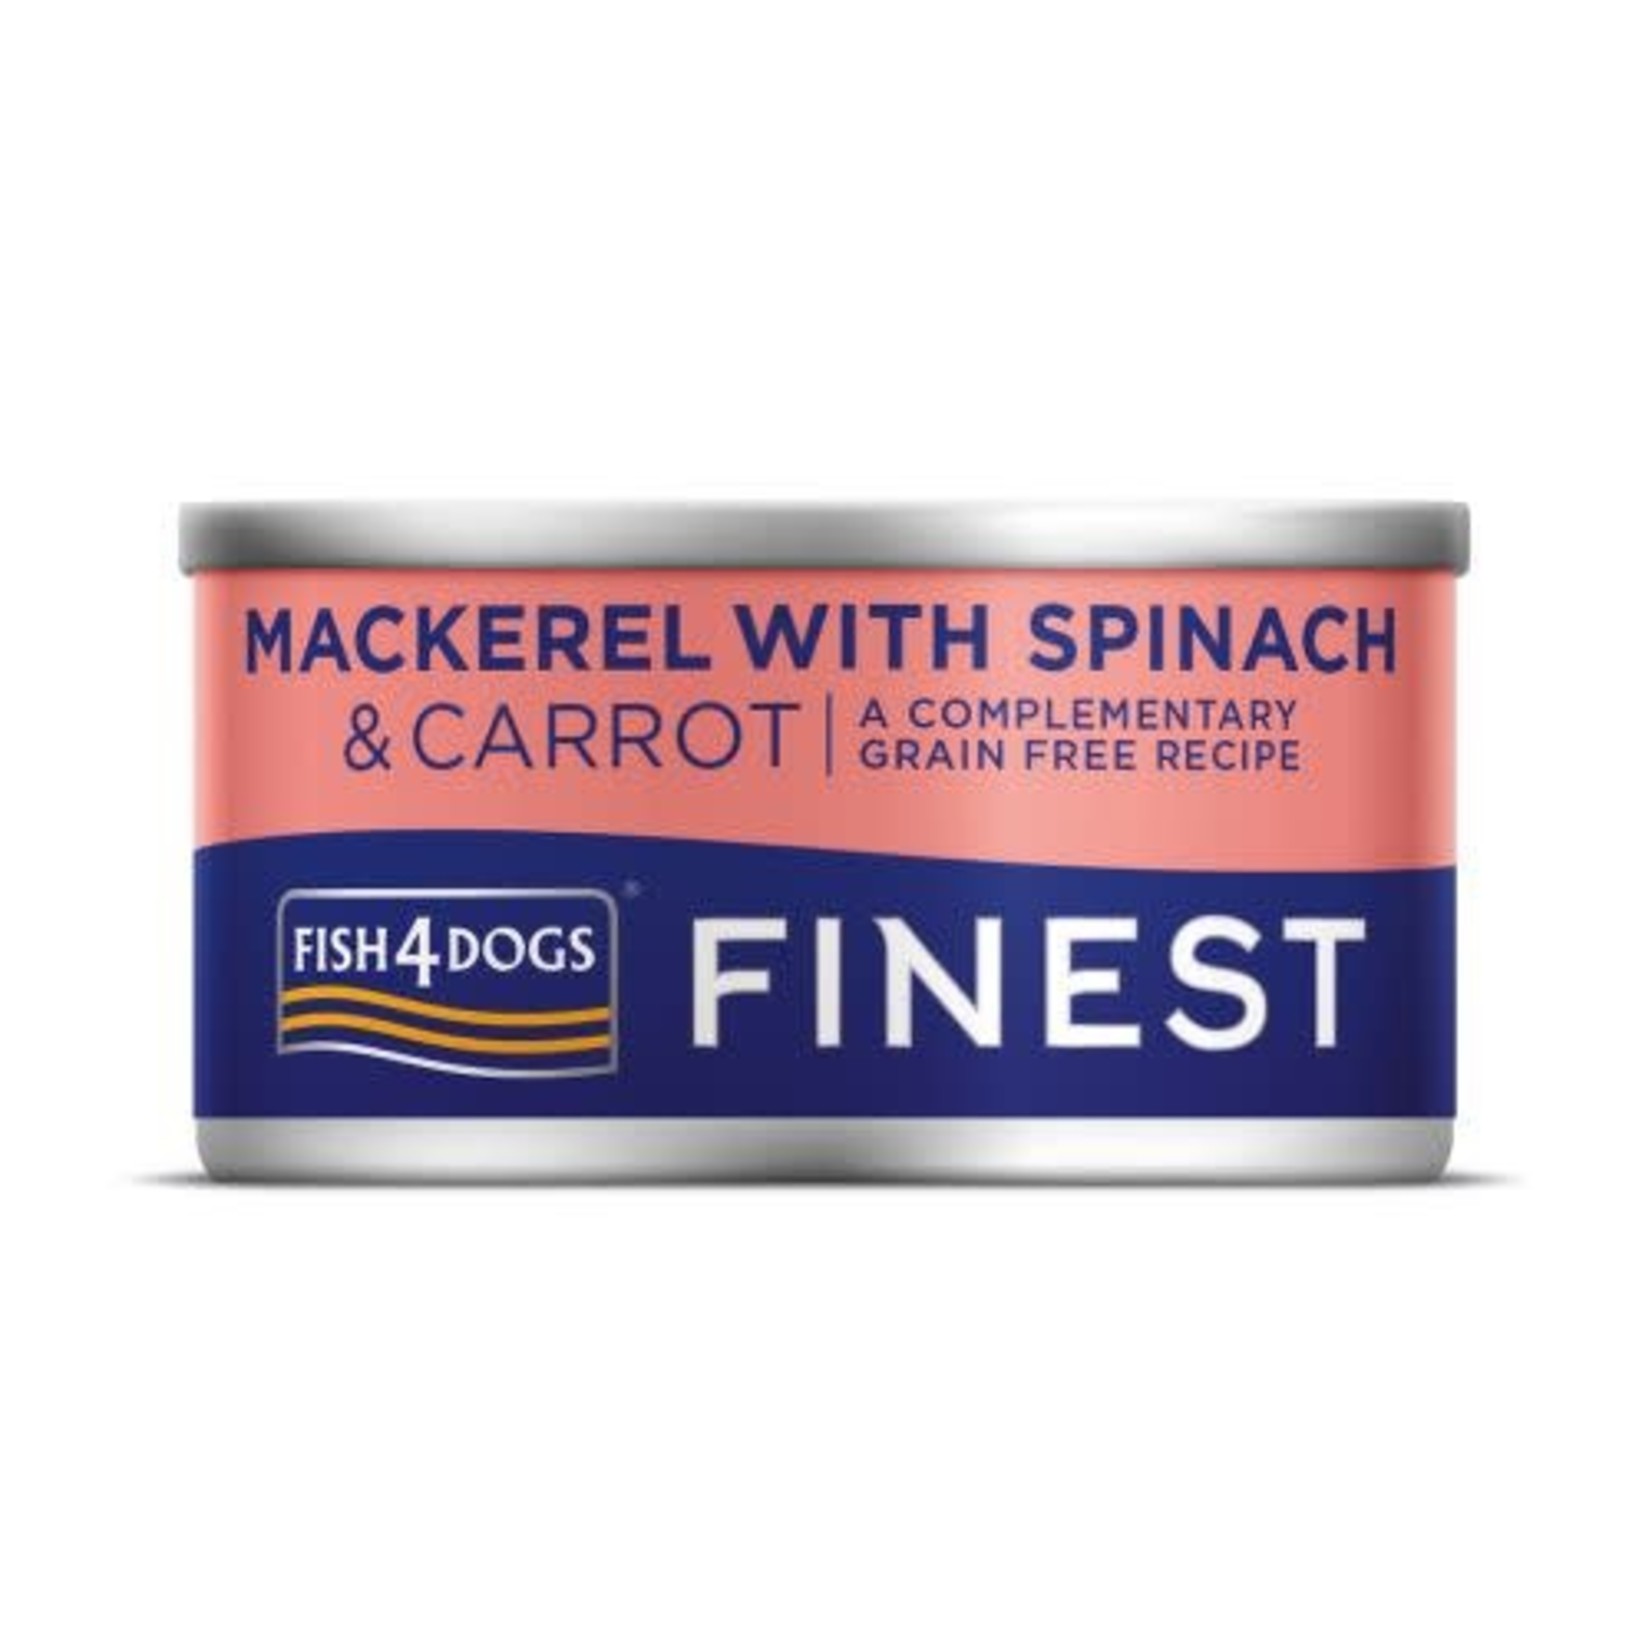 Fish4Dogs Finest Wet Dog Food Mackerel with Carrot & Spinach, 85g can